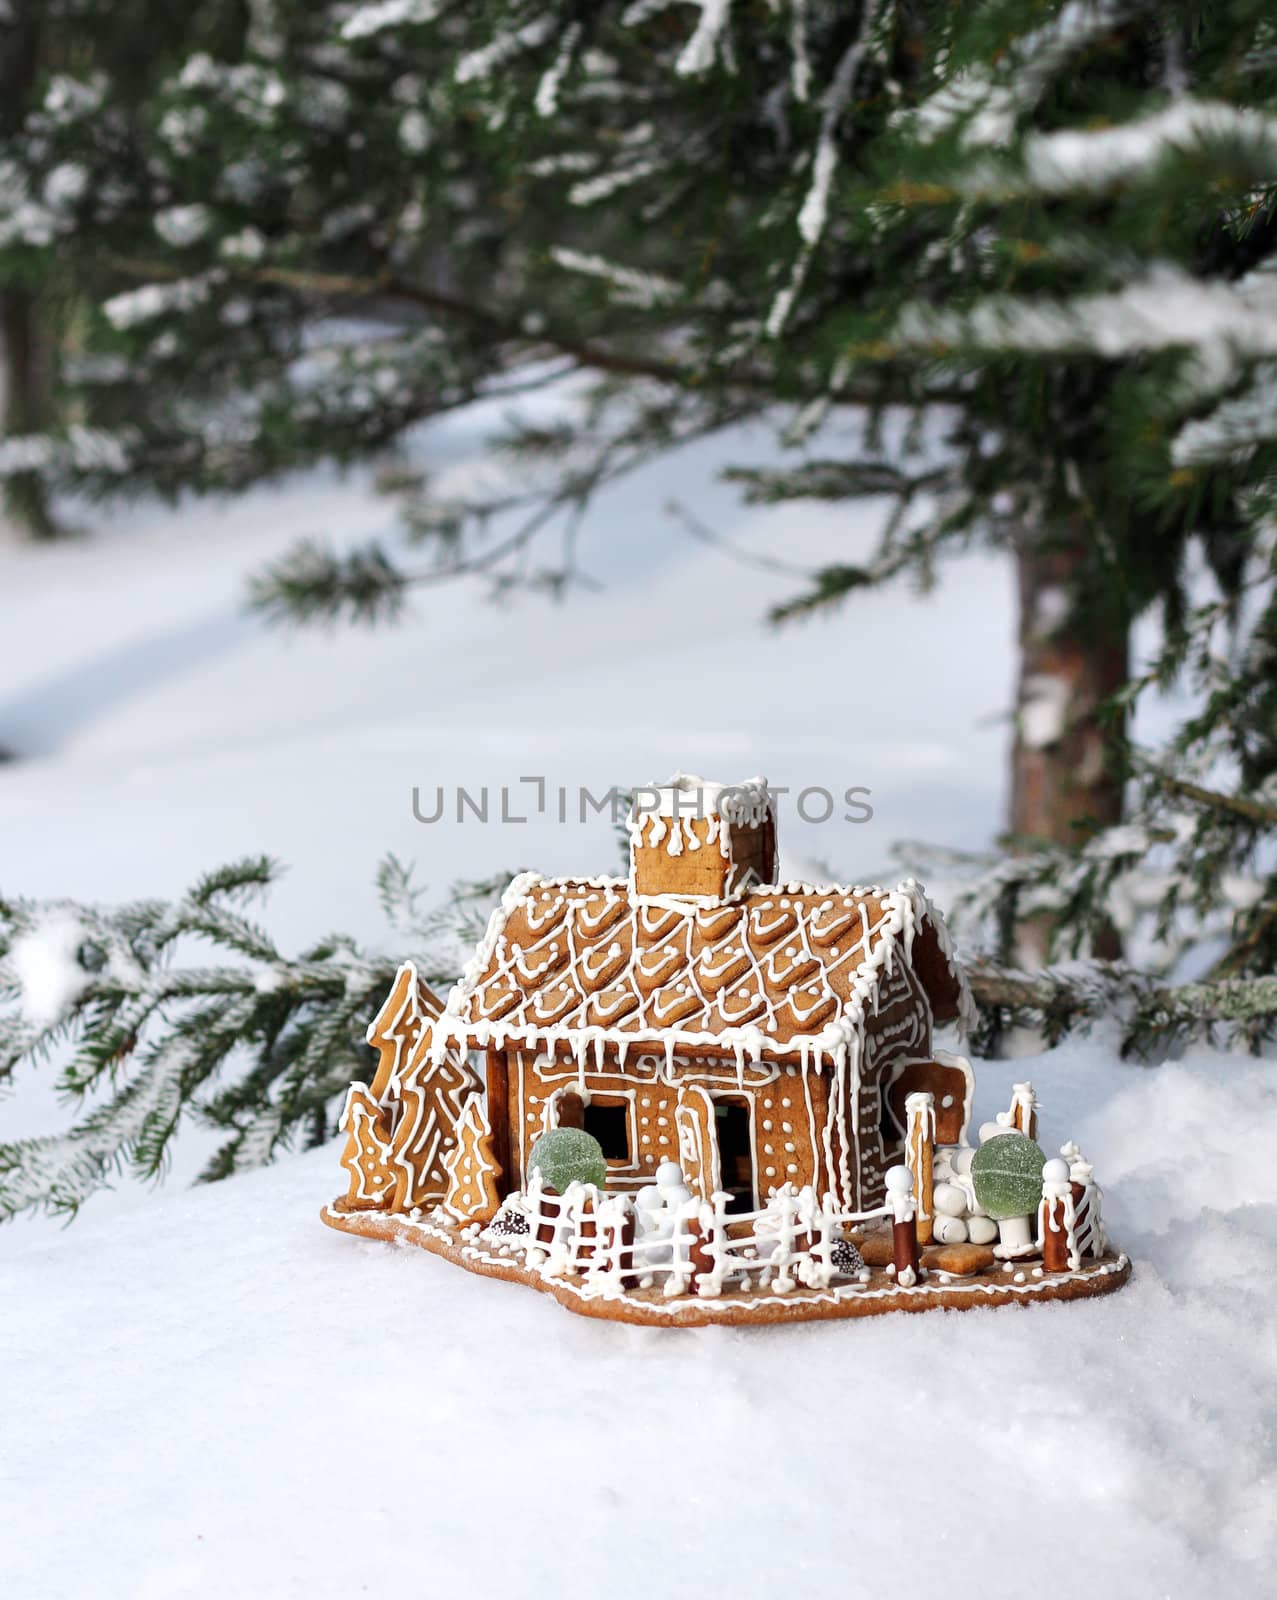 Gingerbread house in real snowy forest by anterovium